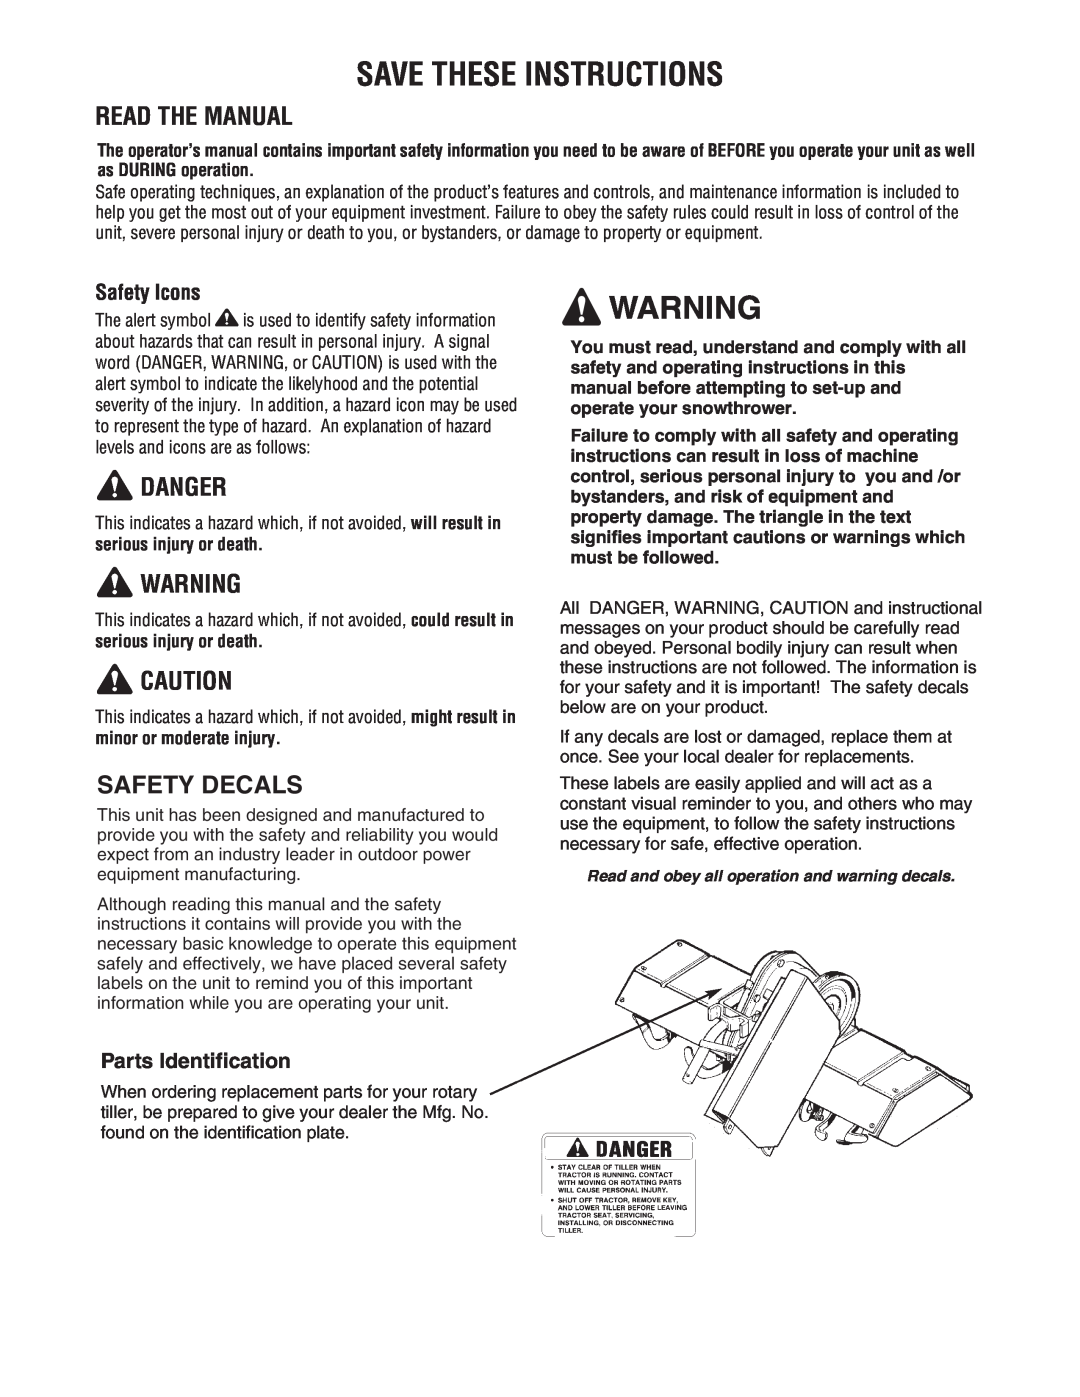 Snapper 1695419 manual Save These Instructions, Read The Manual, Danger, Safety Decals, Safety Icons, Parts Identification 